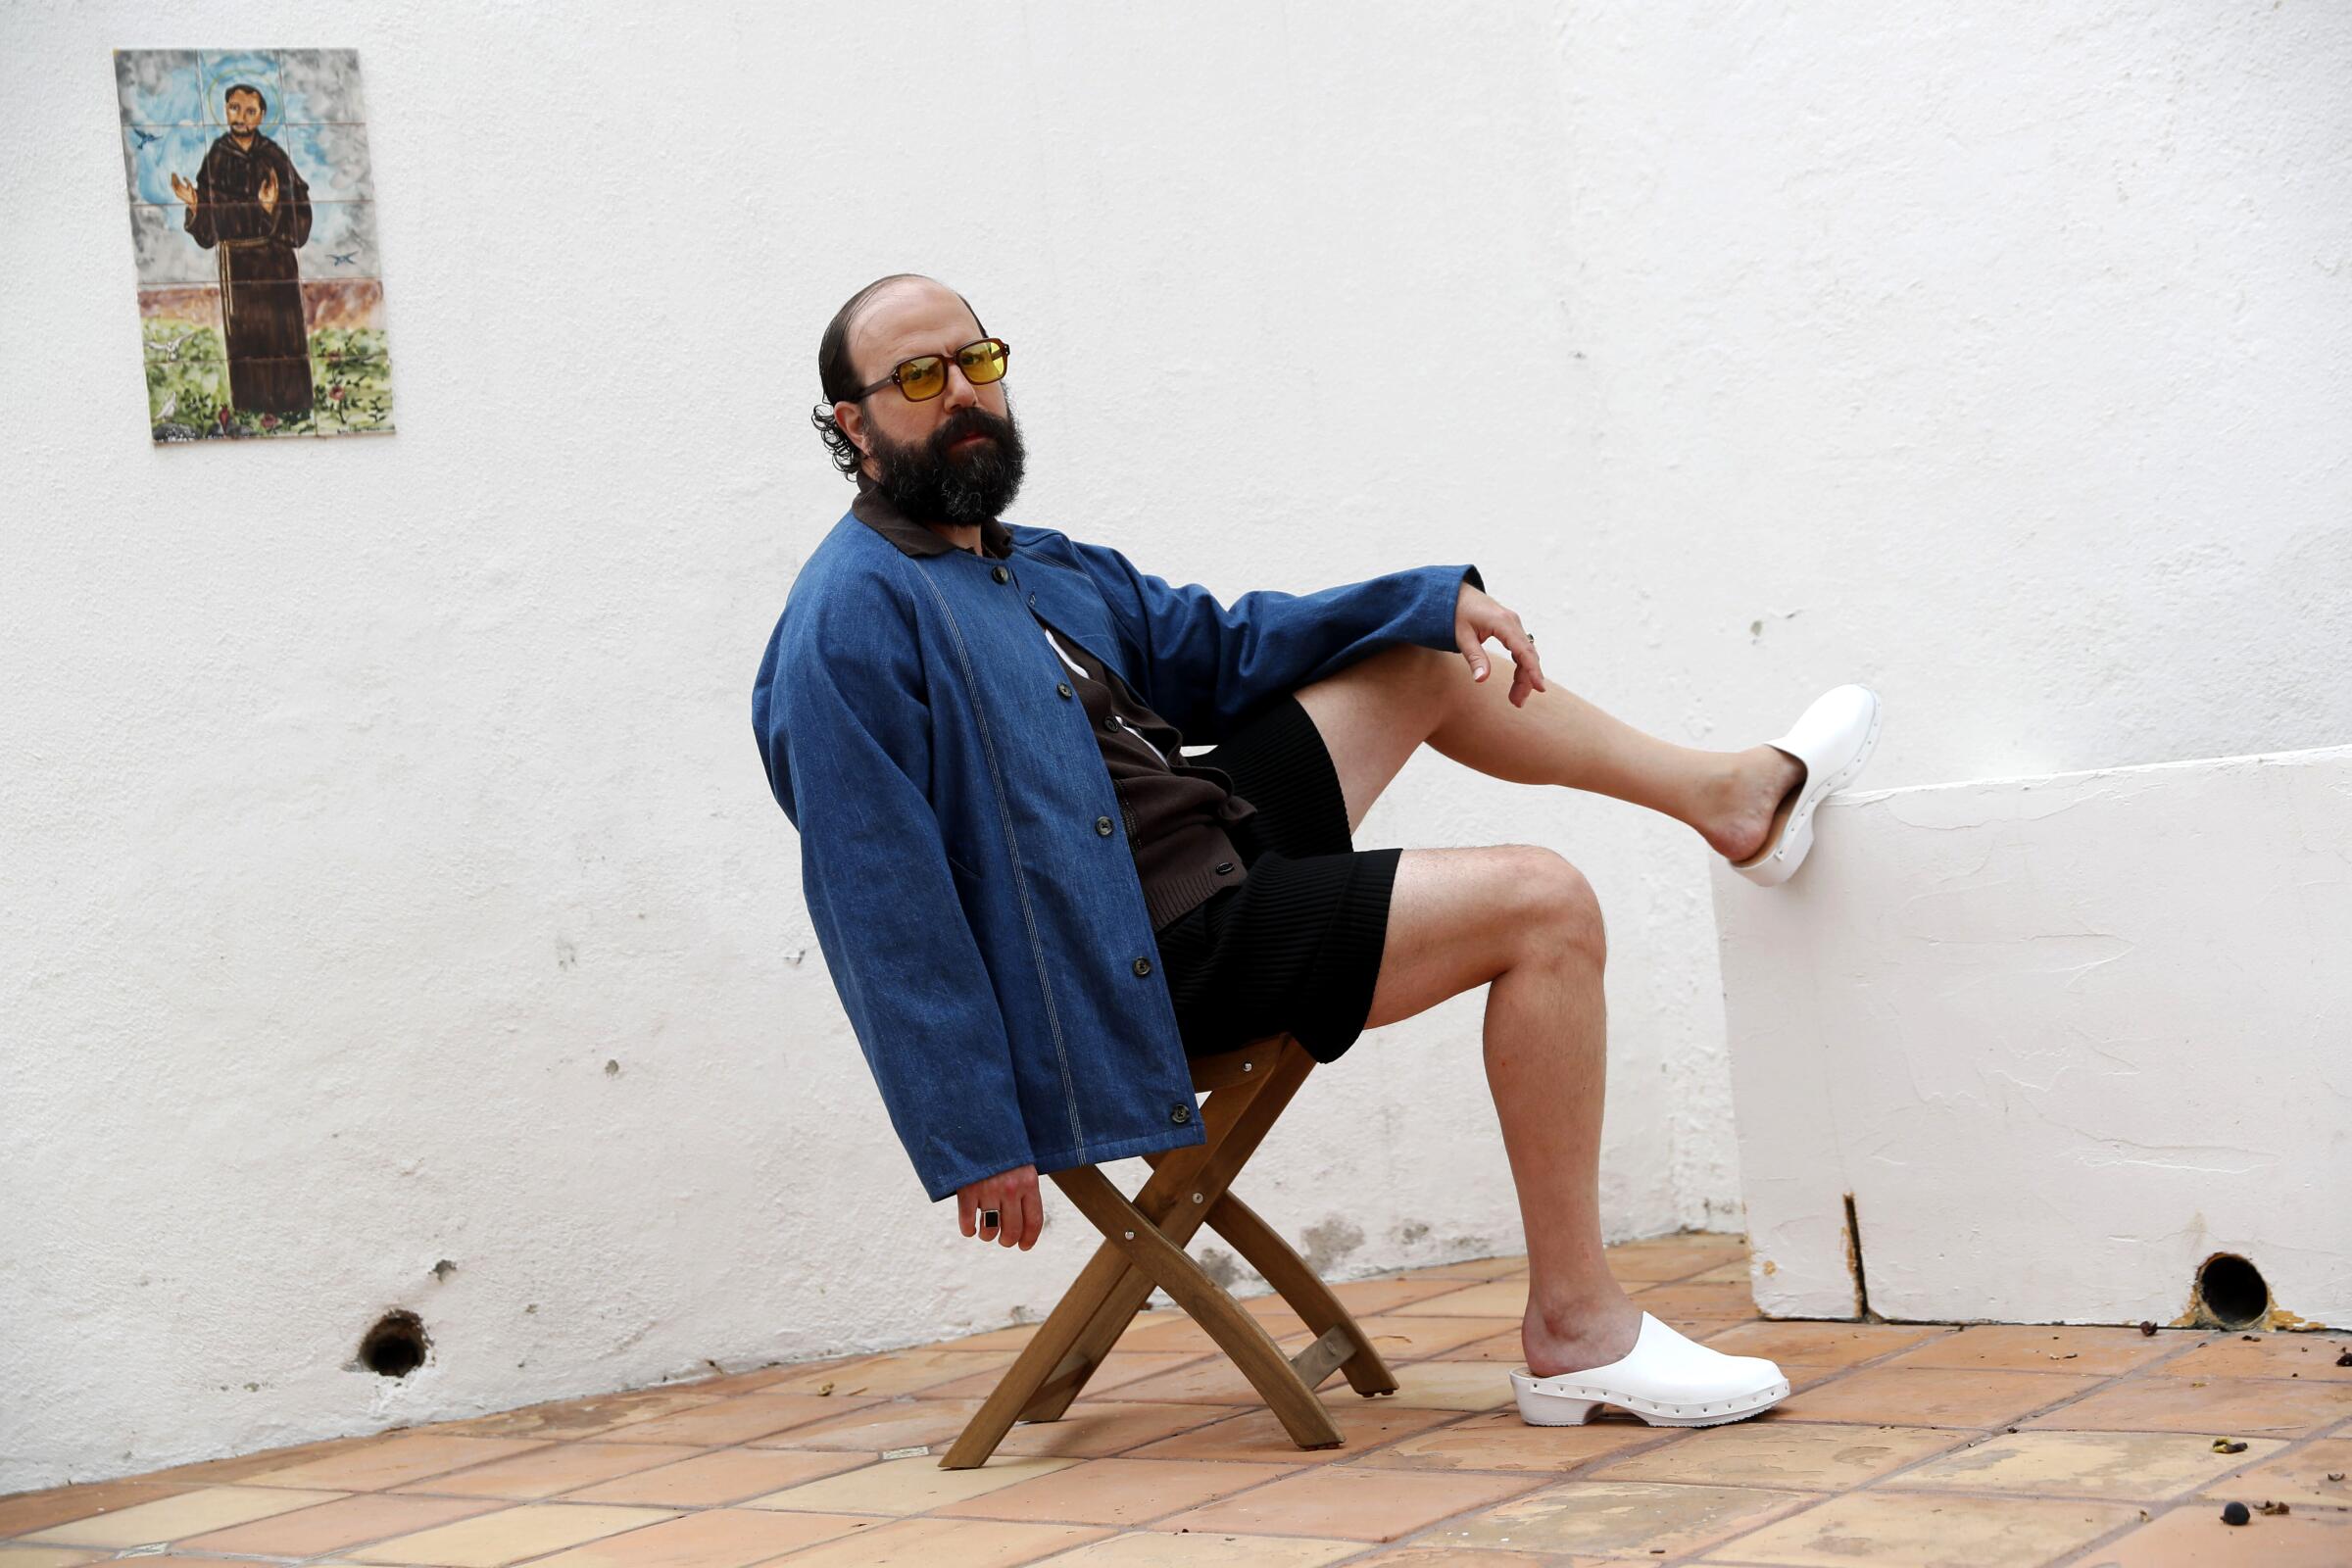 A man in a denim shirt and shorts leans back in a chair on his patio